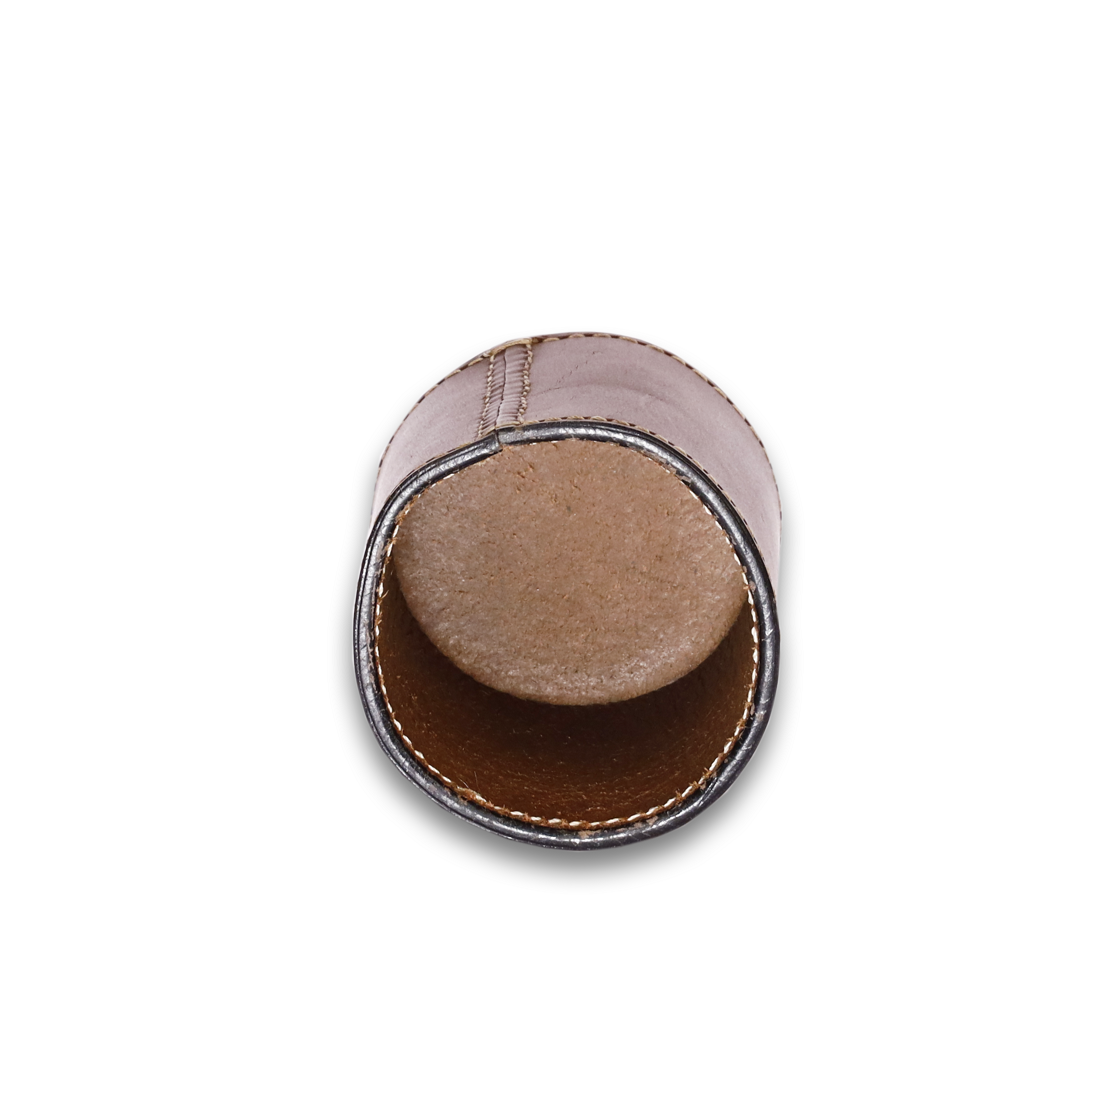 Leather Brown Round Pen Holder